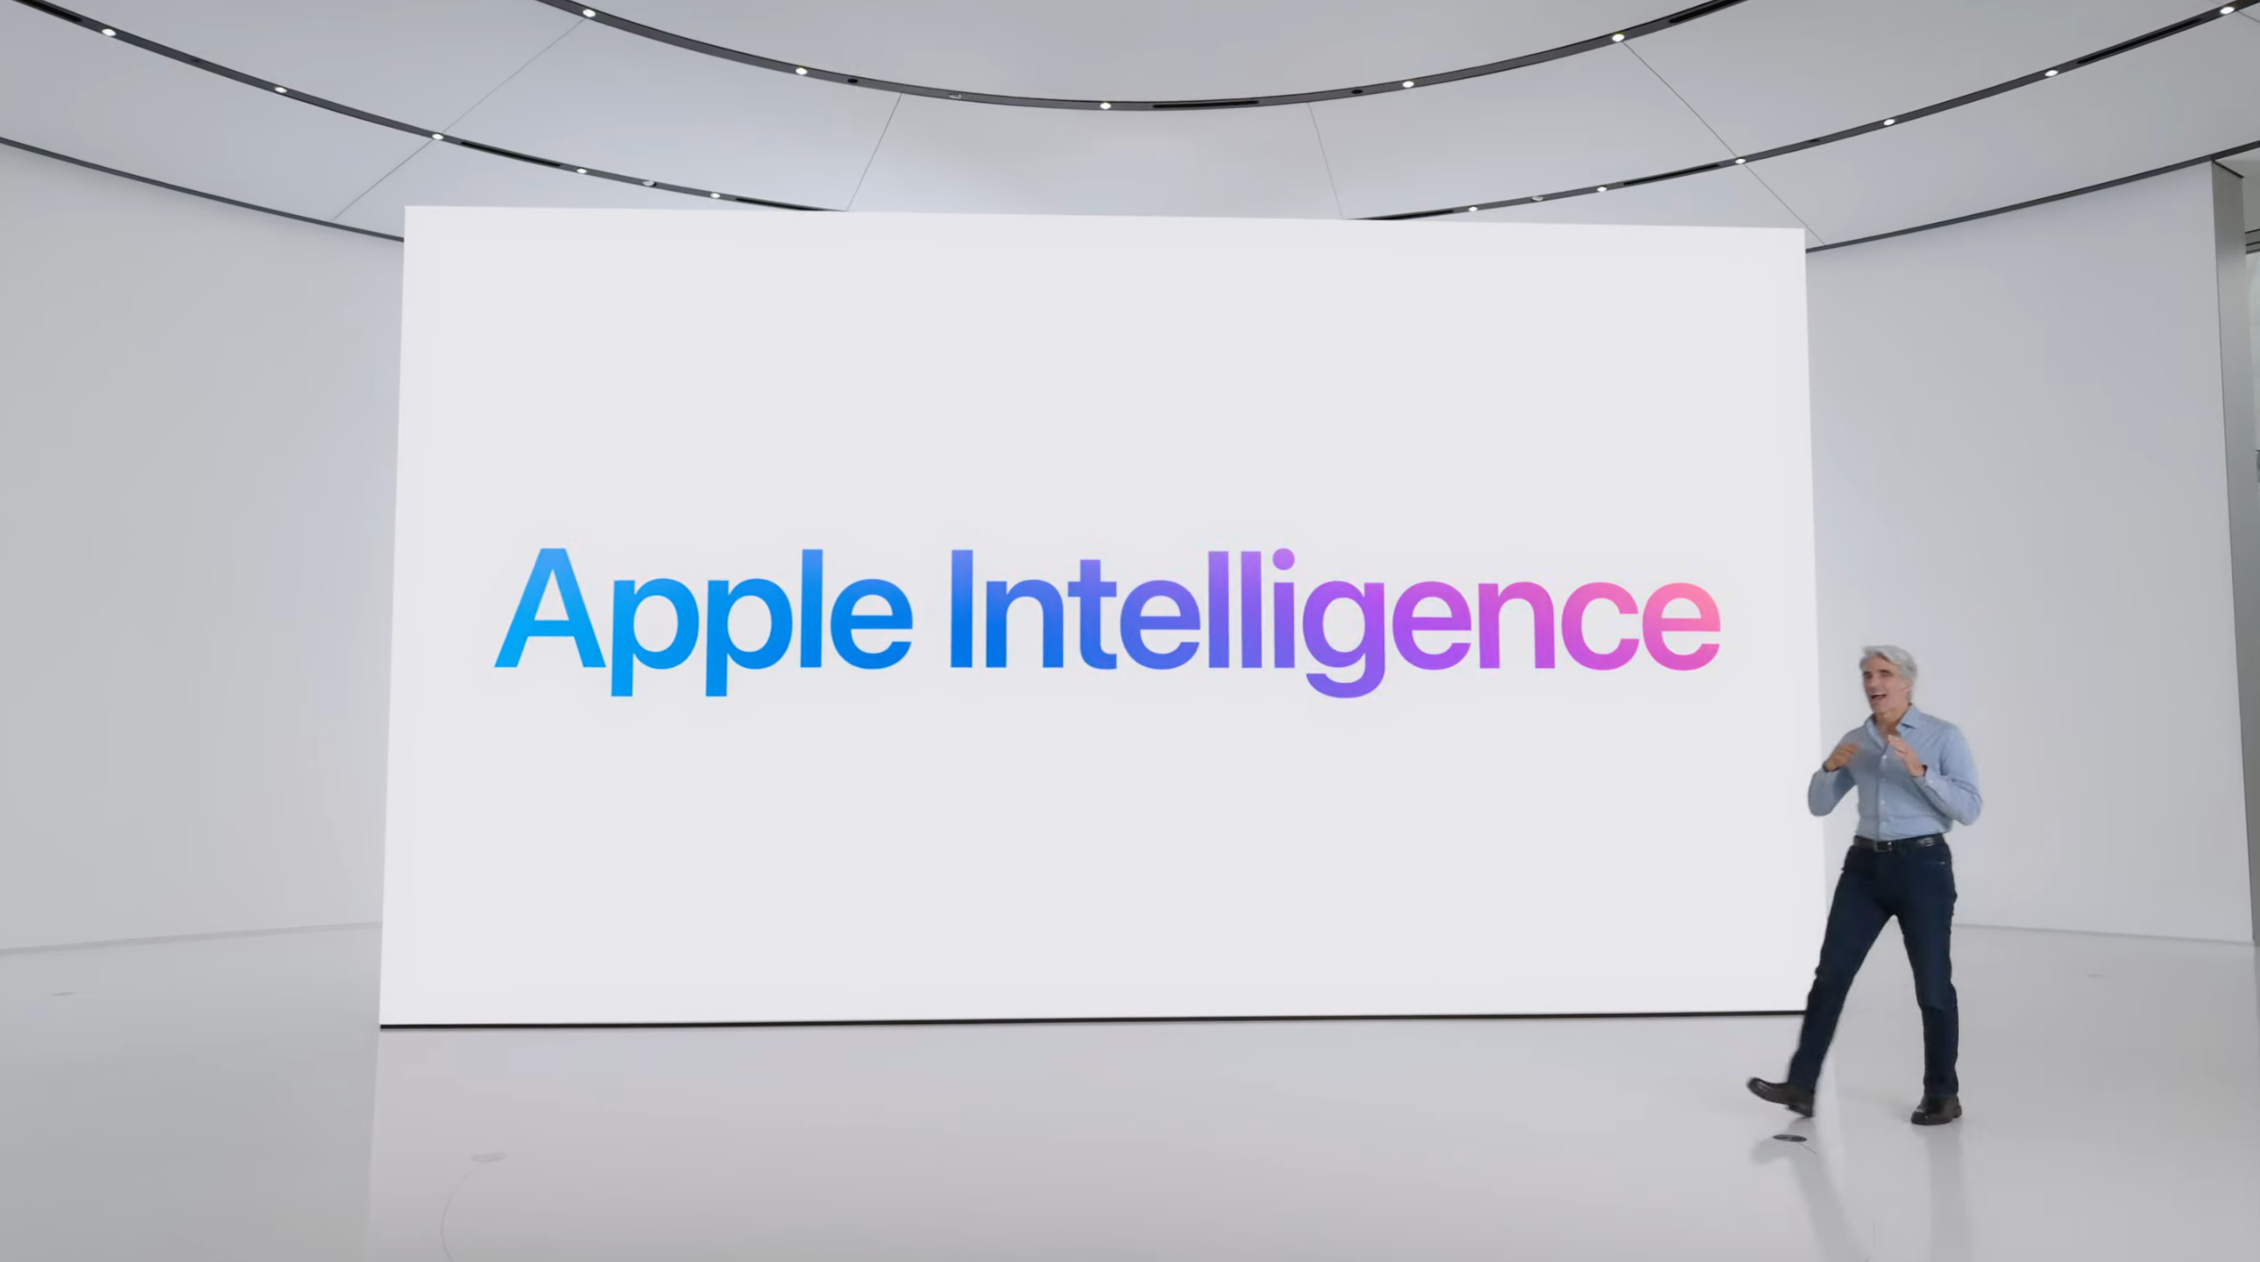 Apple Intelligence Will Infuse the iPhone With Generative AI